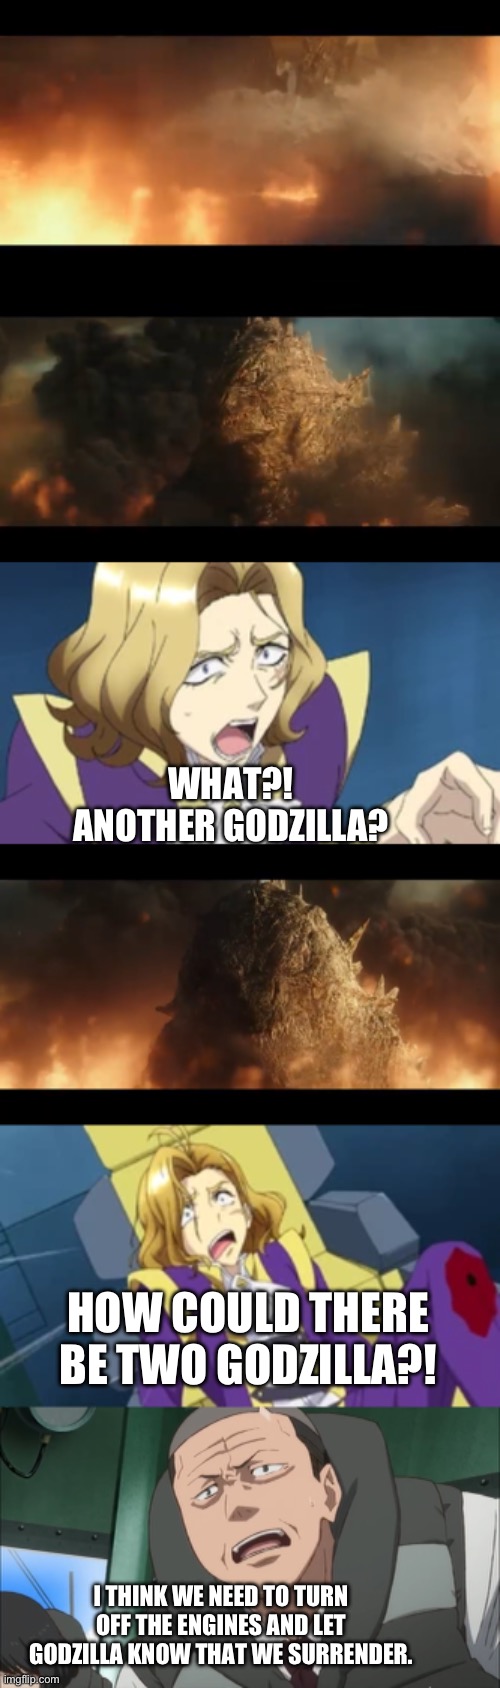 Legendary Godzilla reveal himself | WHAT?! ANOTHER GODZILLA? HOW COULD THERE BE TWO GODZILLA?! I THINK WE NEED TO TURN OFF THE ENGINES AND LET GODZILLA KNOW THAT WE SURRENDER. | image tagged in anime,godzilla | made w/ Imgflip meme maker